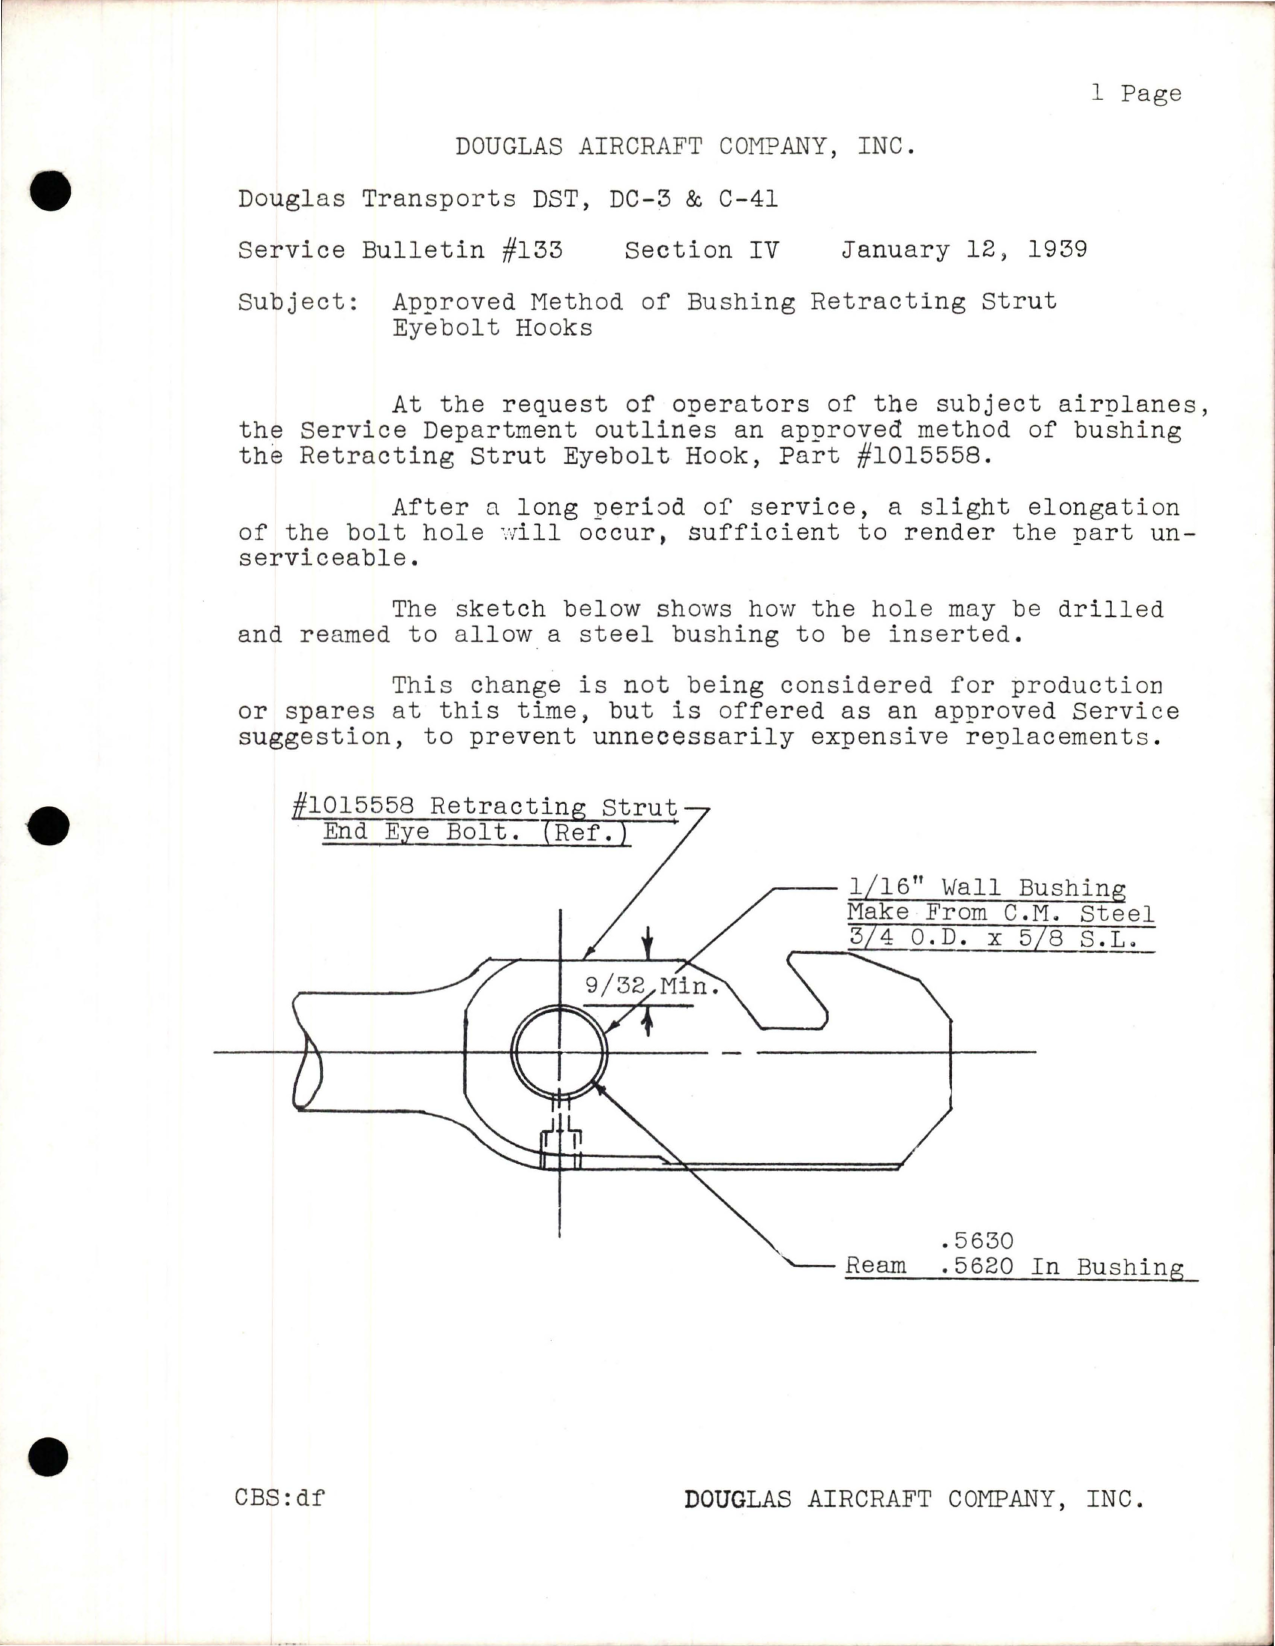 Sample page 1 from AirCorps Library document: Approved Method of Bushing Retracting Strut Eyebolt Hooks